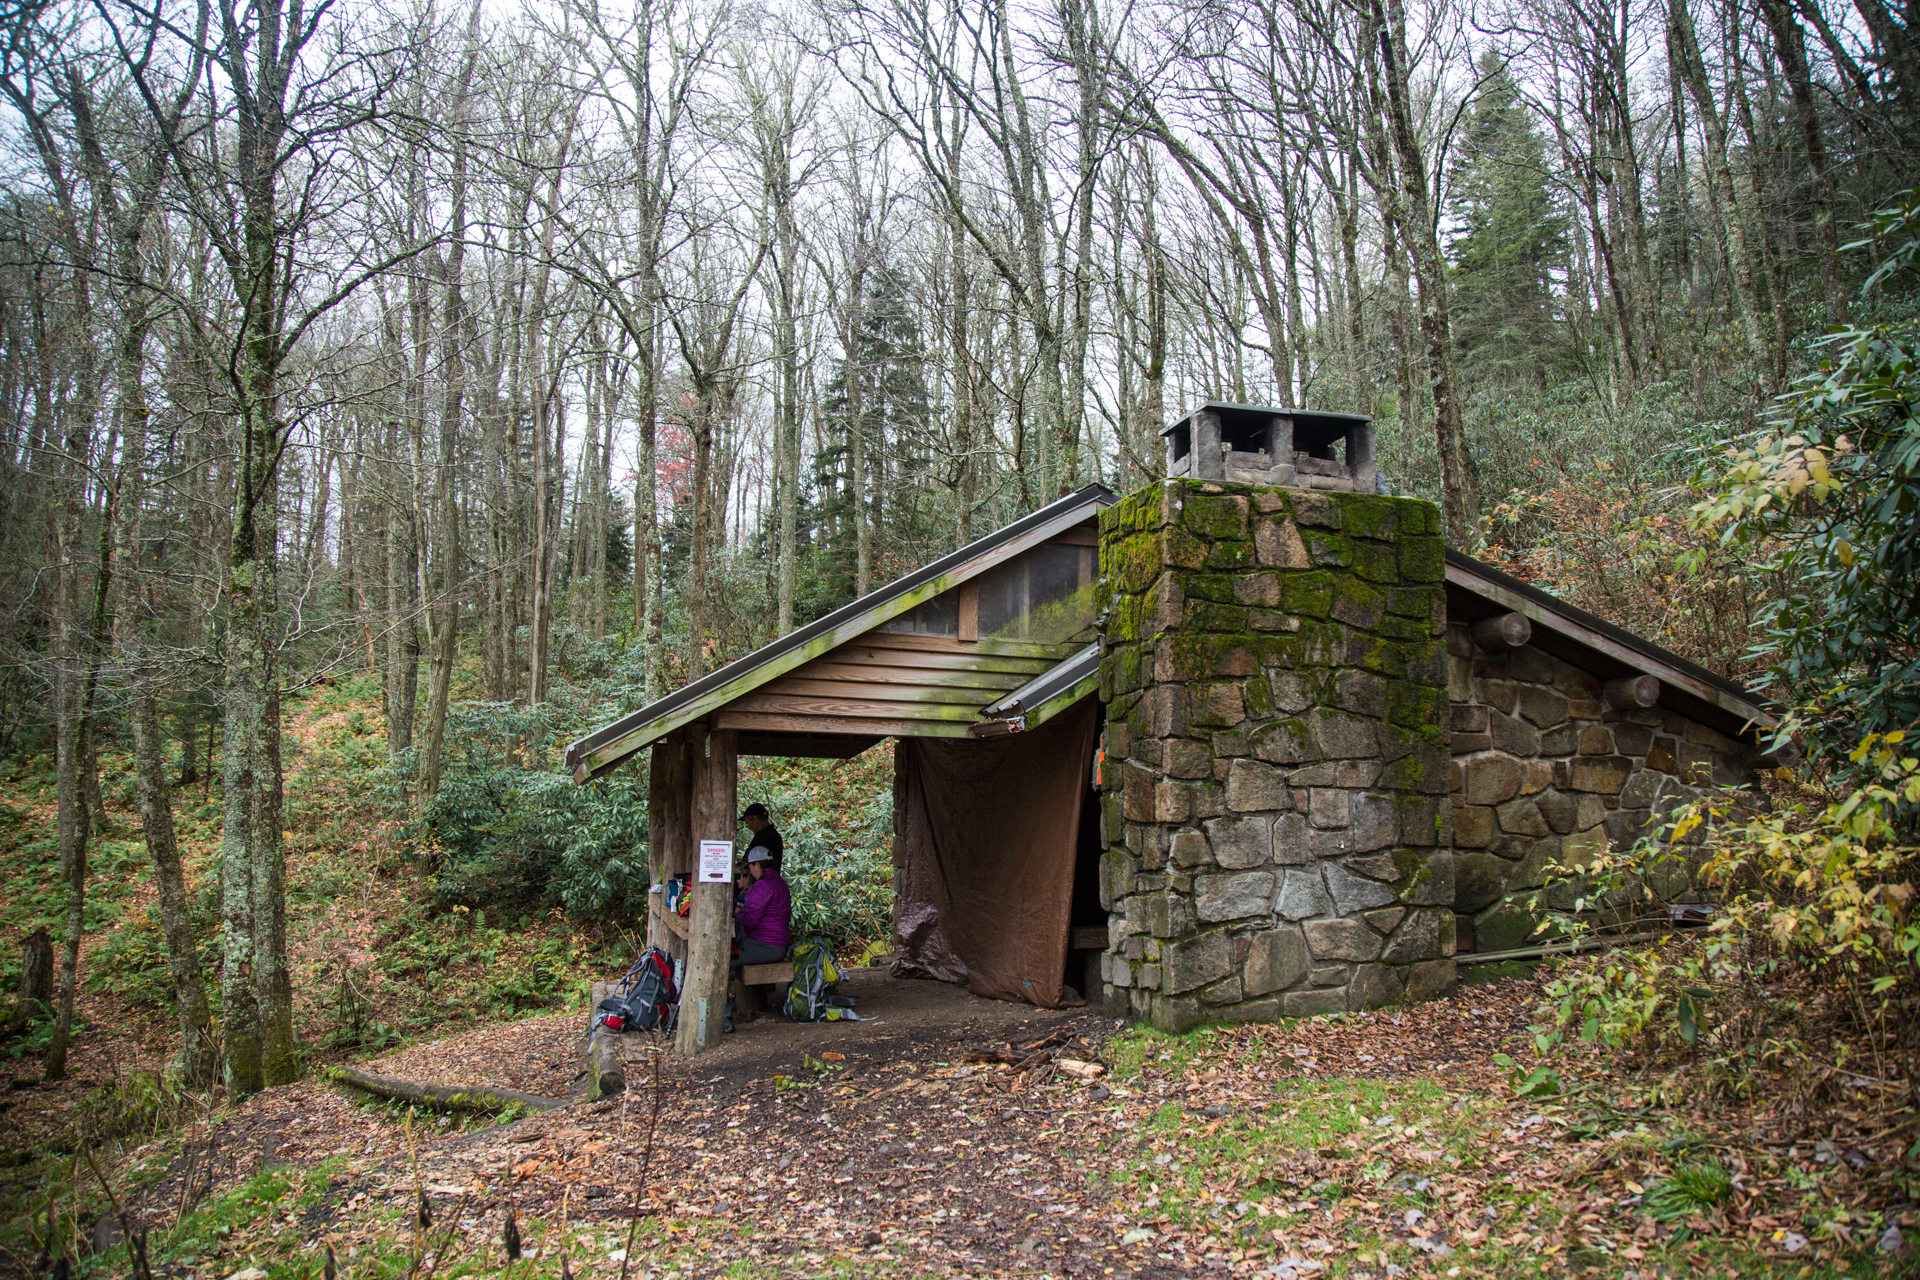 People sitting outside Cosby Knob shelter among the trees.